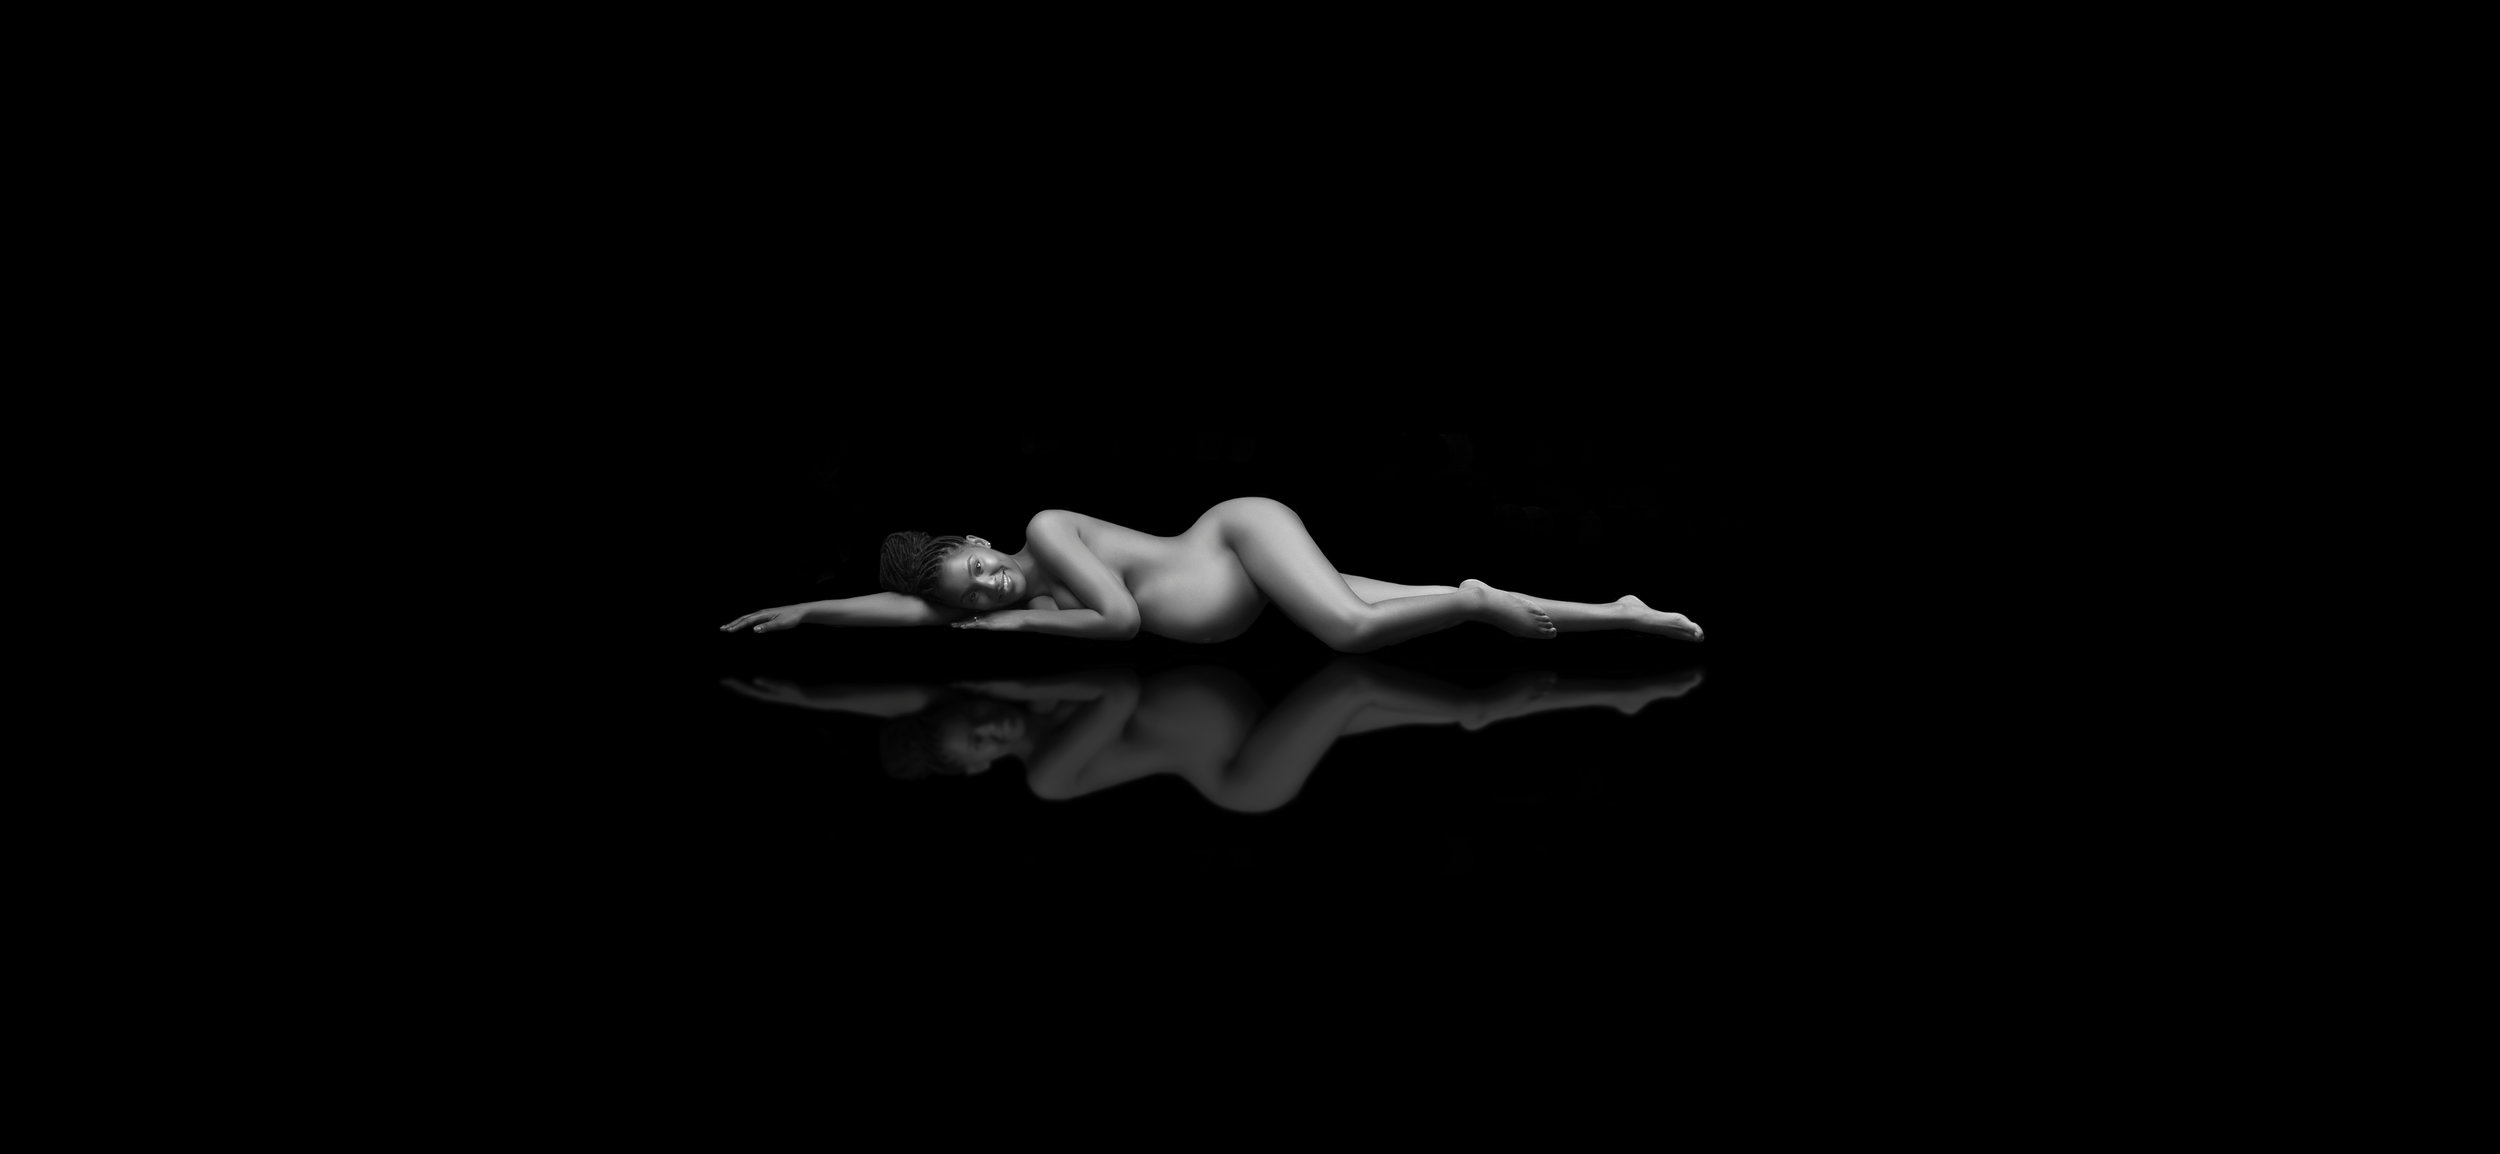 "Maternity photoshoot: Expectant mother lying on black surface with reflection on the ground